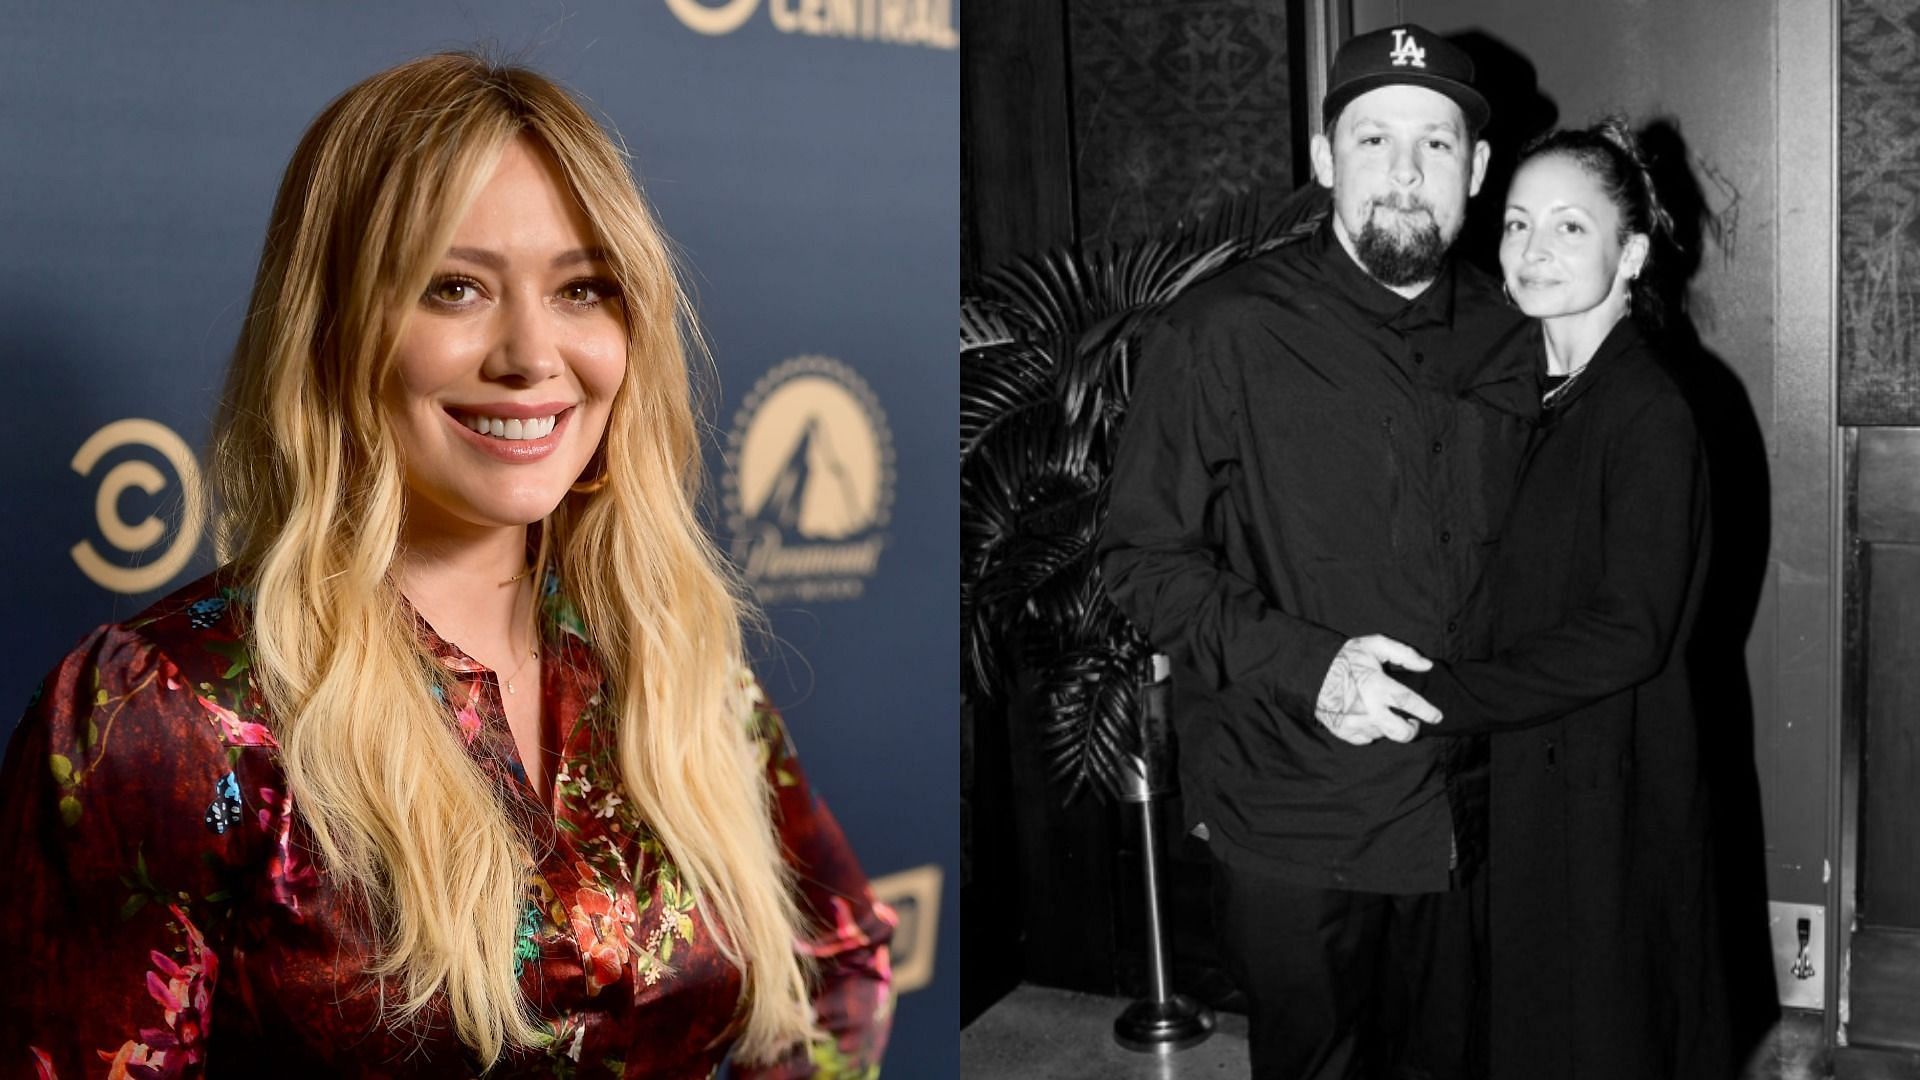 Hilary Duff and Joel Madden dated for two years in 2004 before breaking up amicably (Image via Getty Images/ Matt Winkelmeyer; Instagram/ joelmadden)